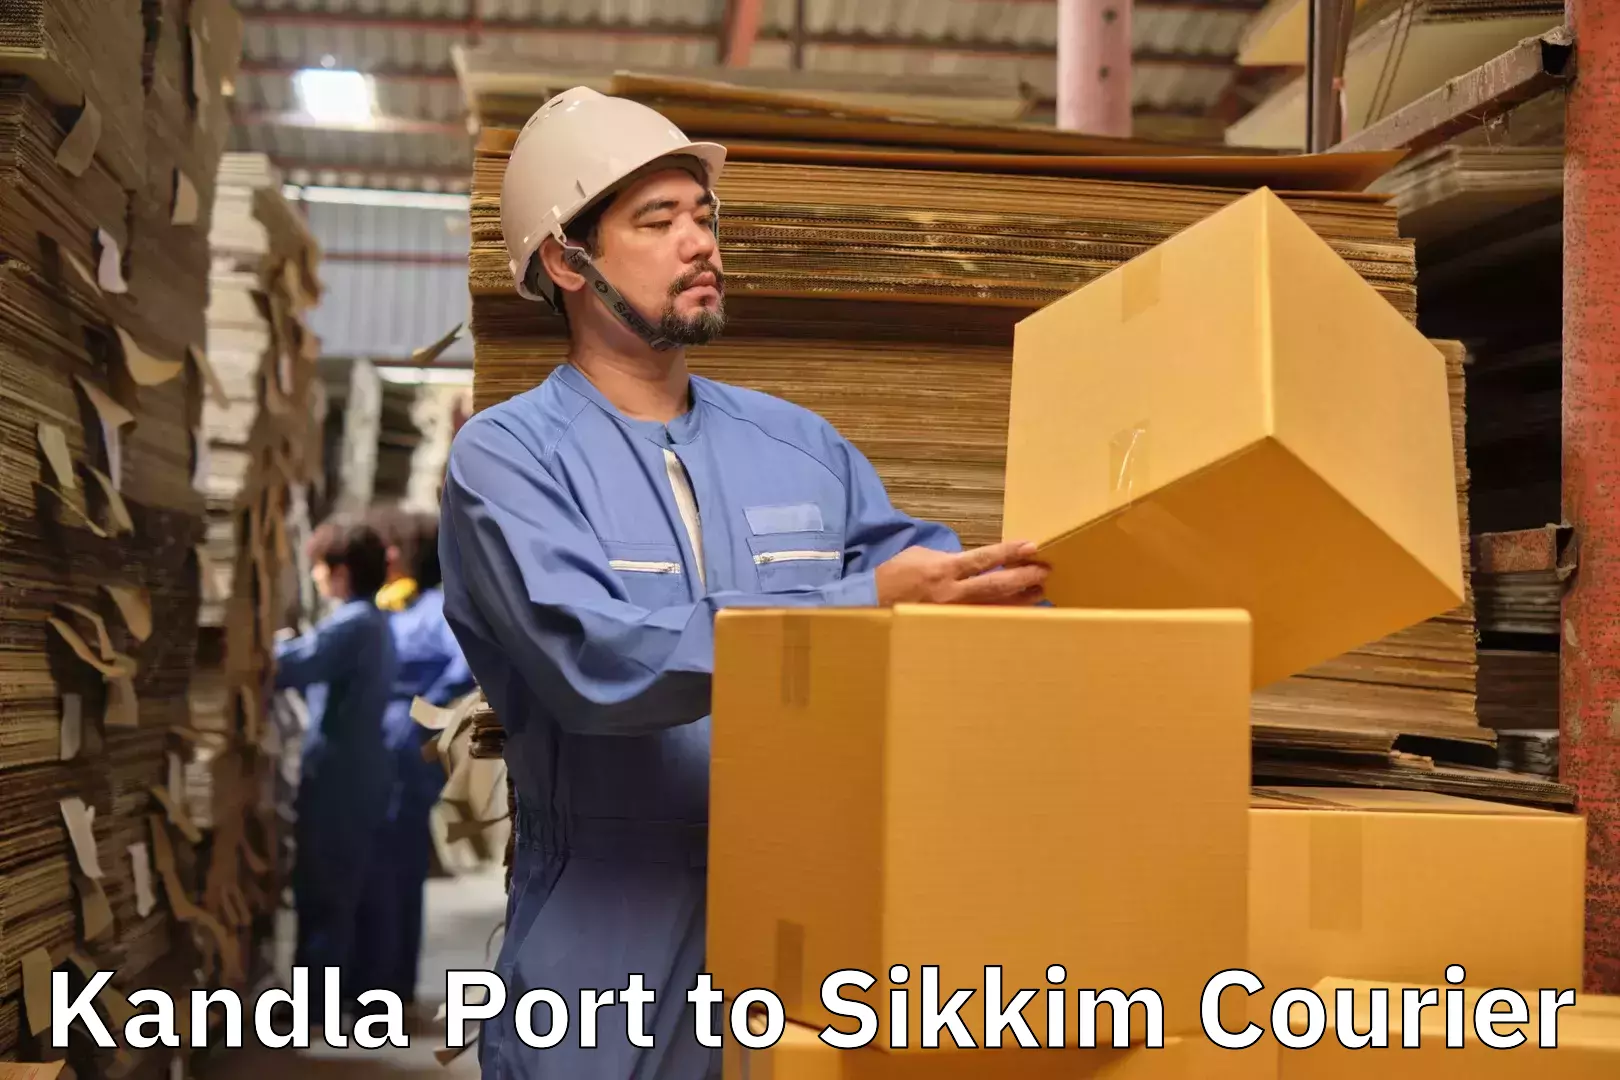 Luggage delivery network Kandla Port to East Sikkim